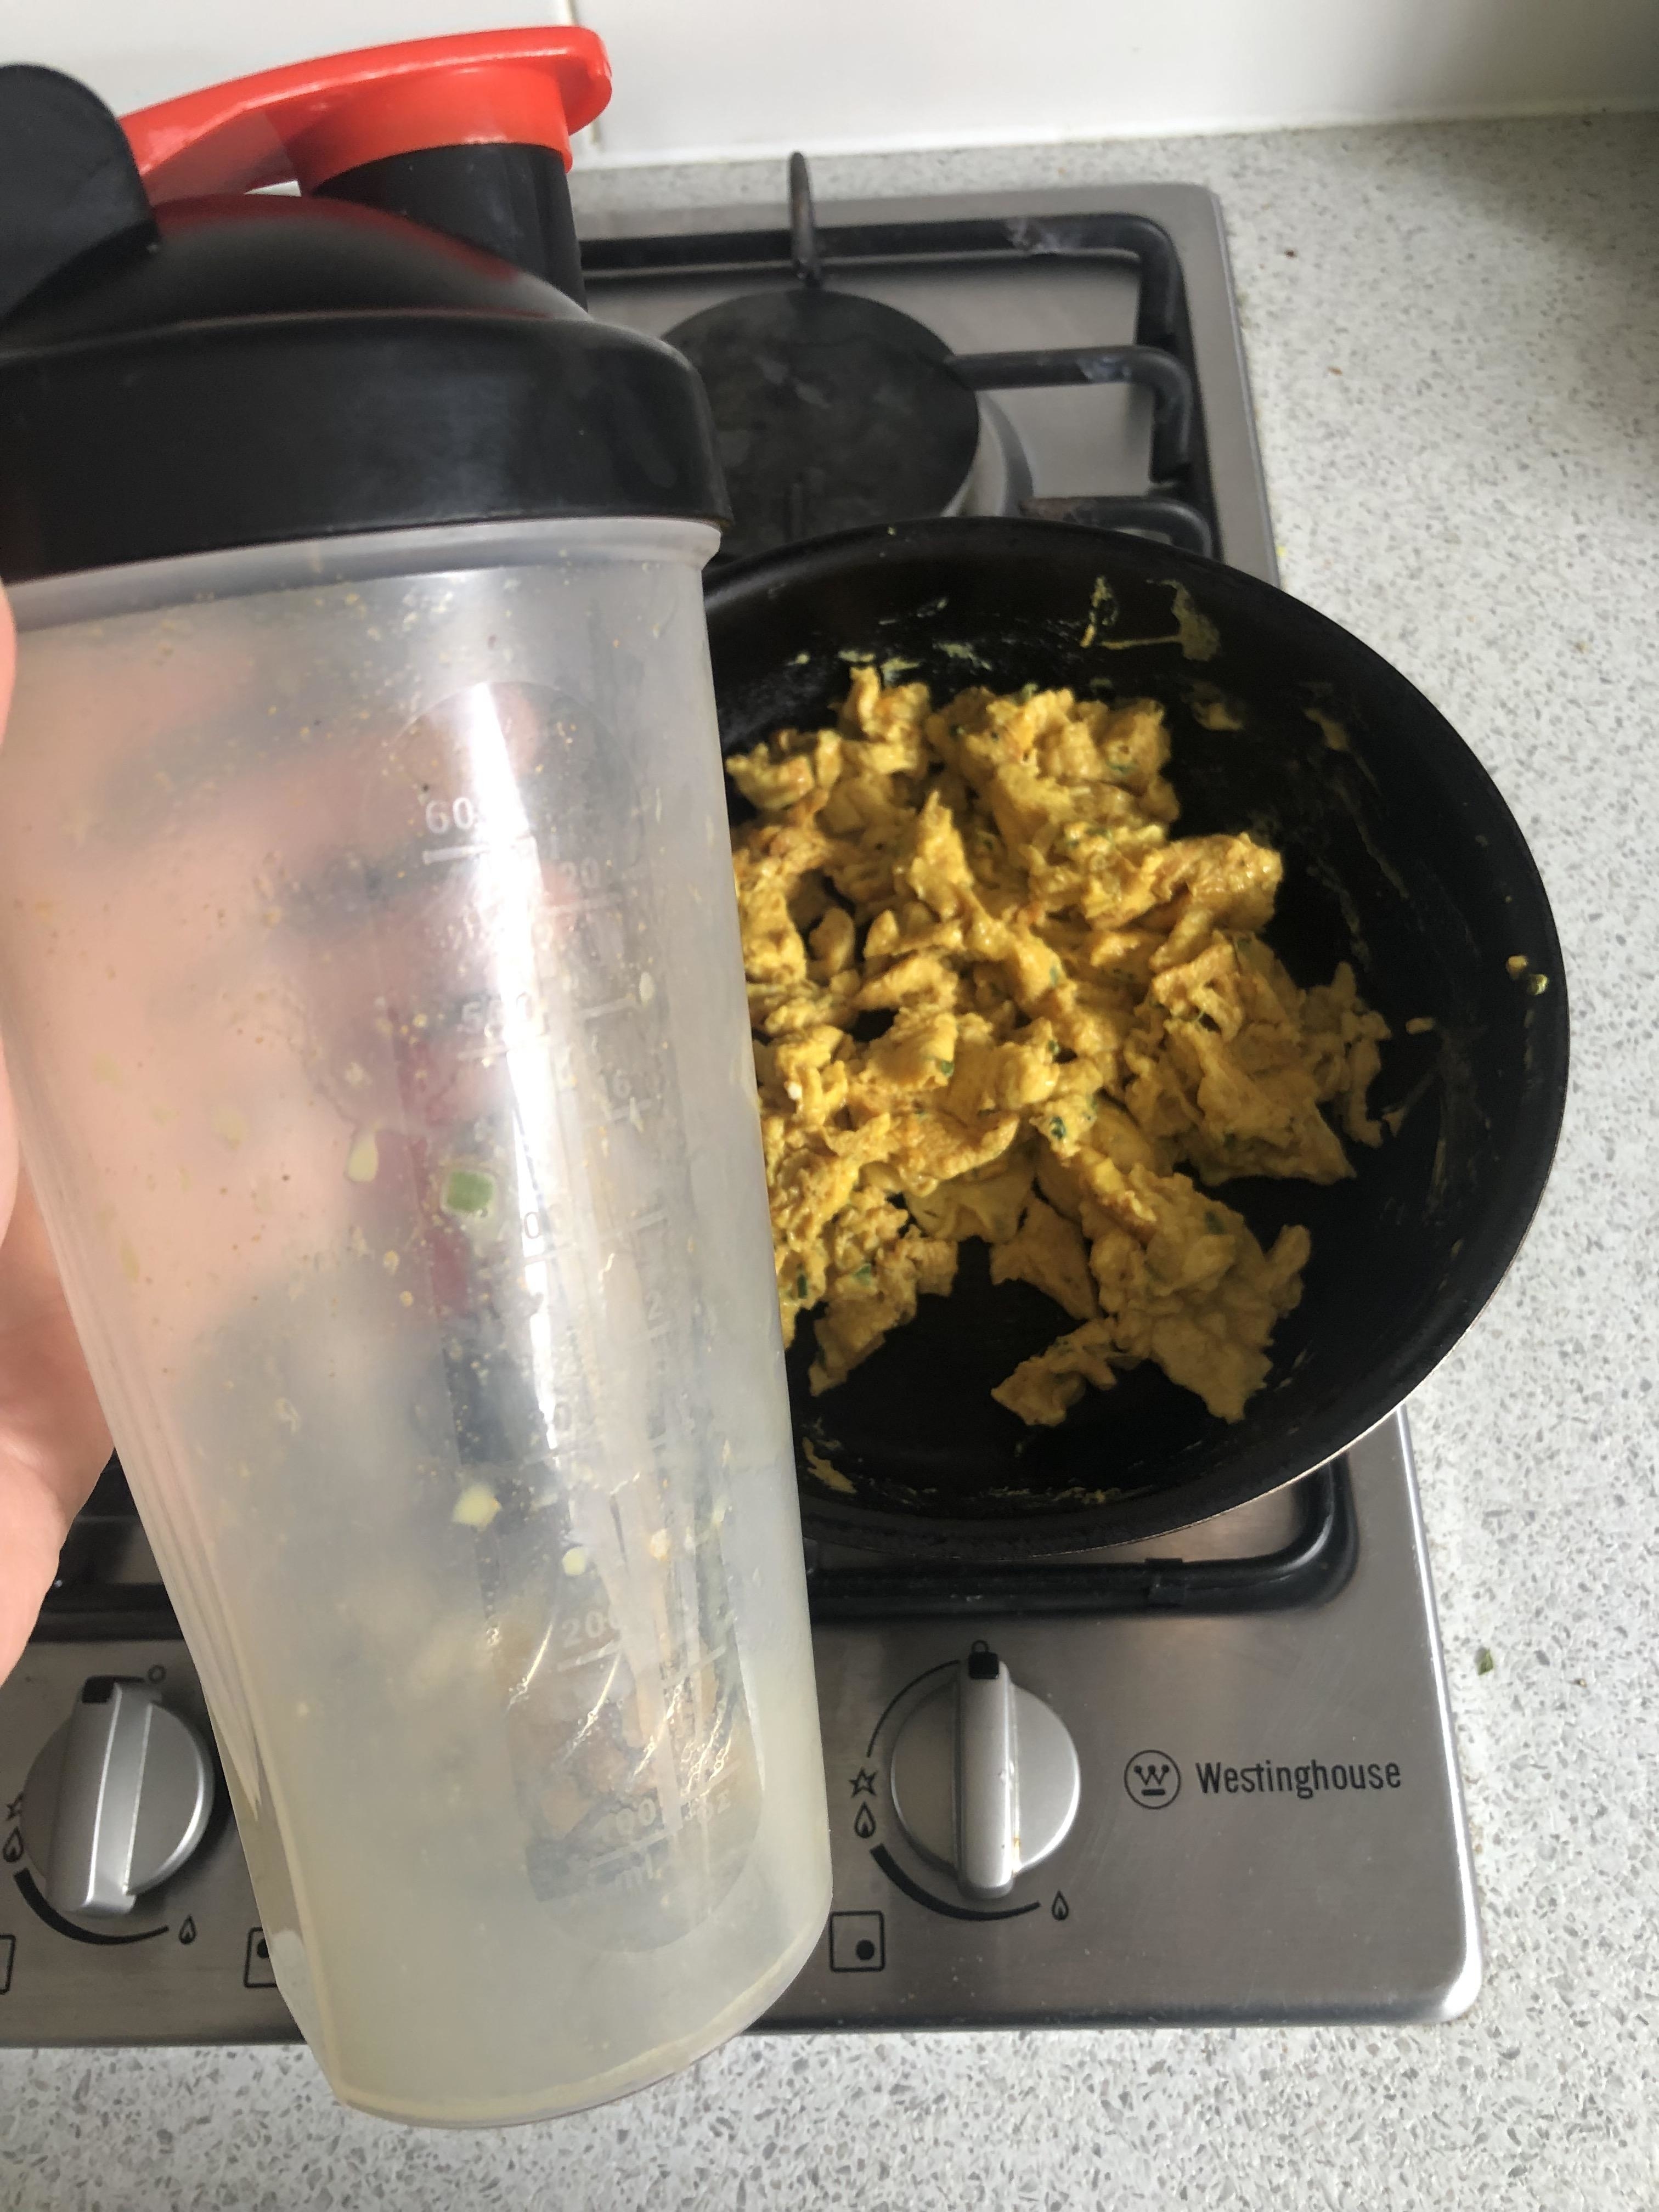 Someone holding a protein shaker in front of eggs on the stove